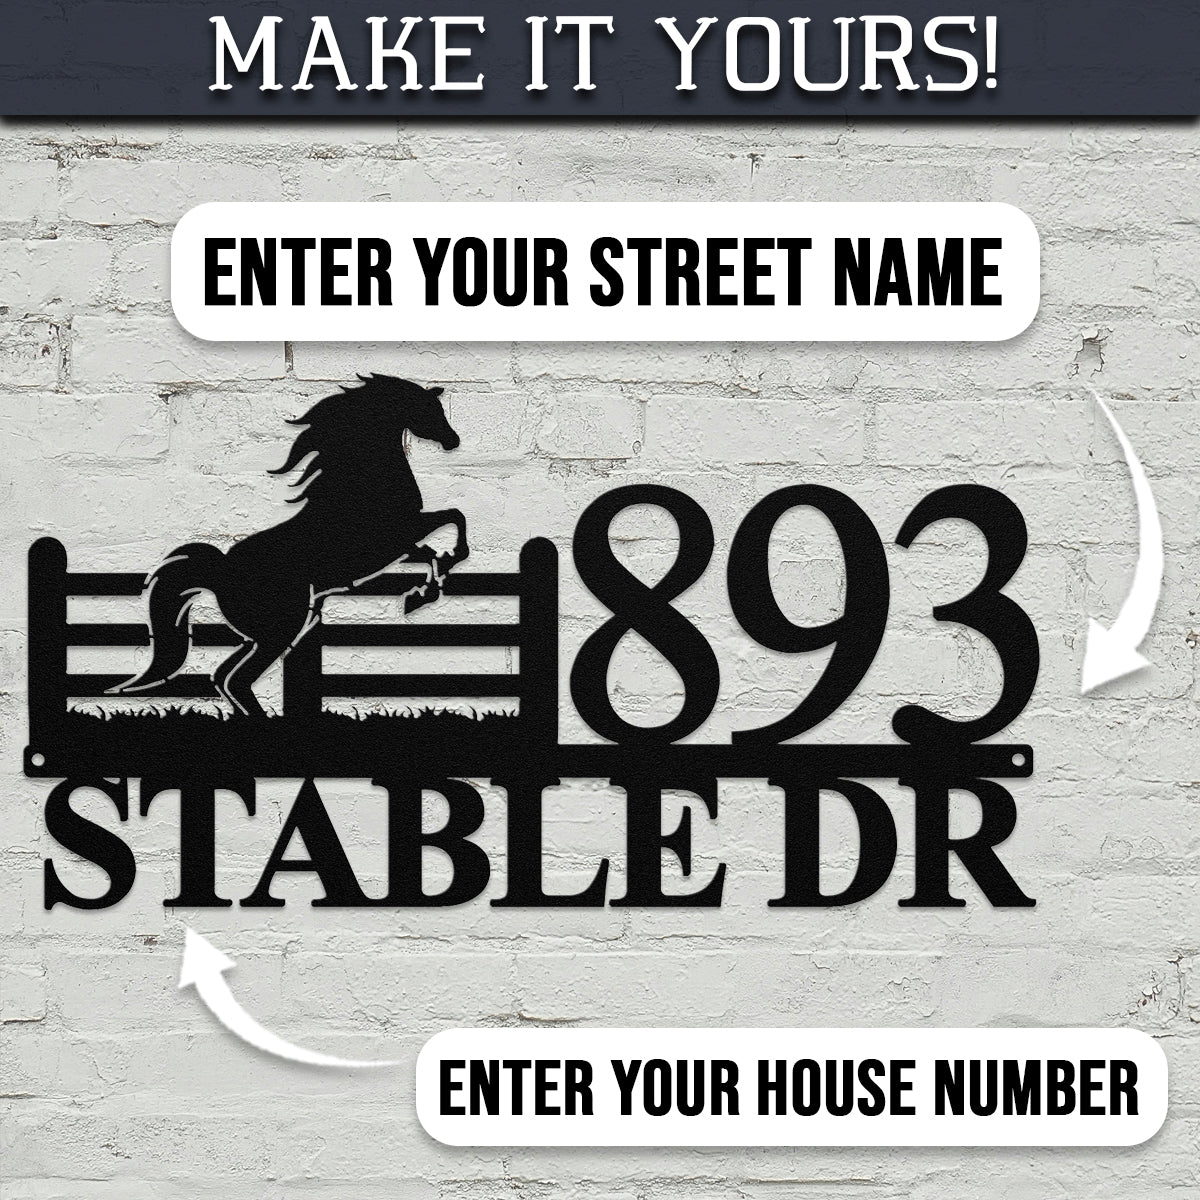 Horse (Street Name & Number)